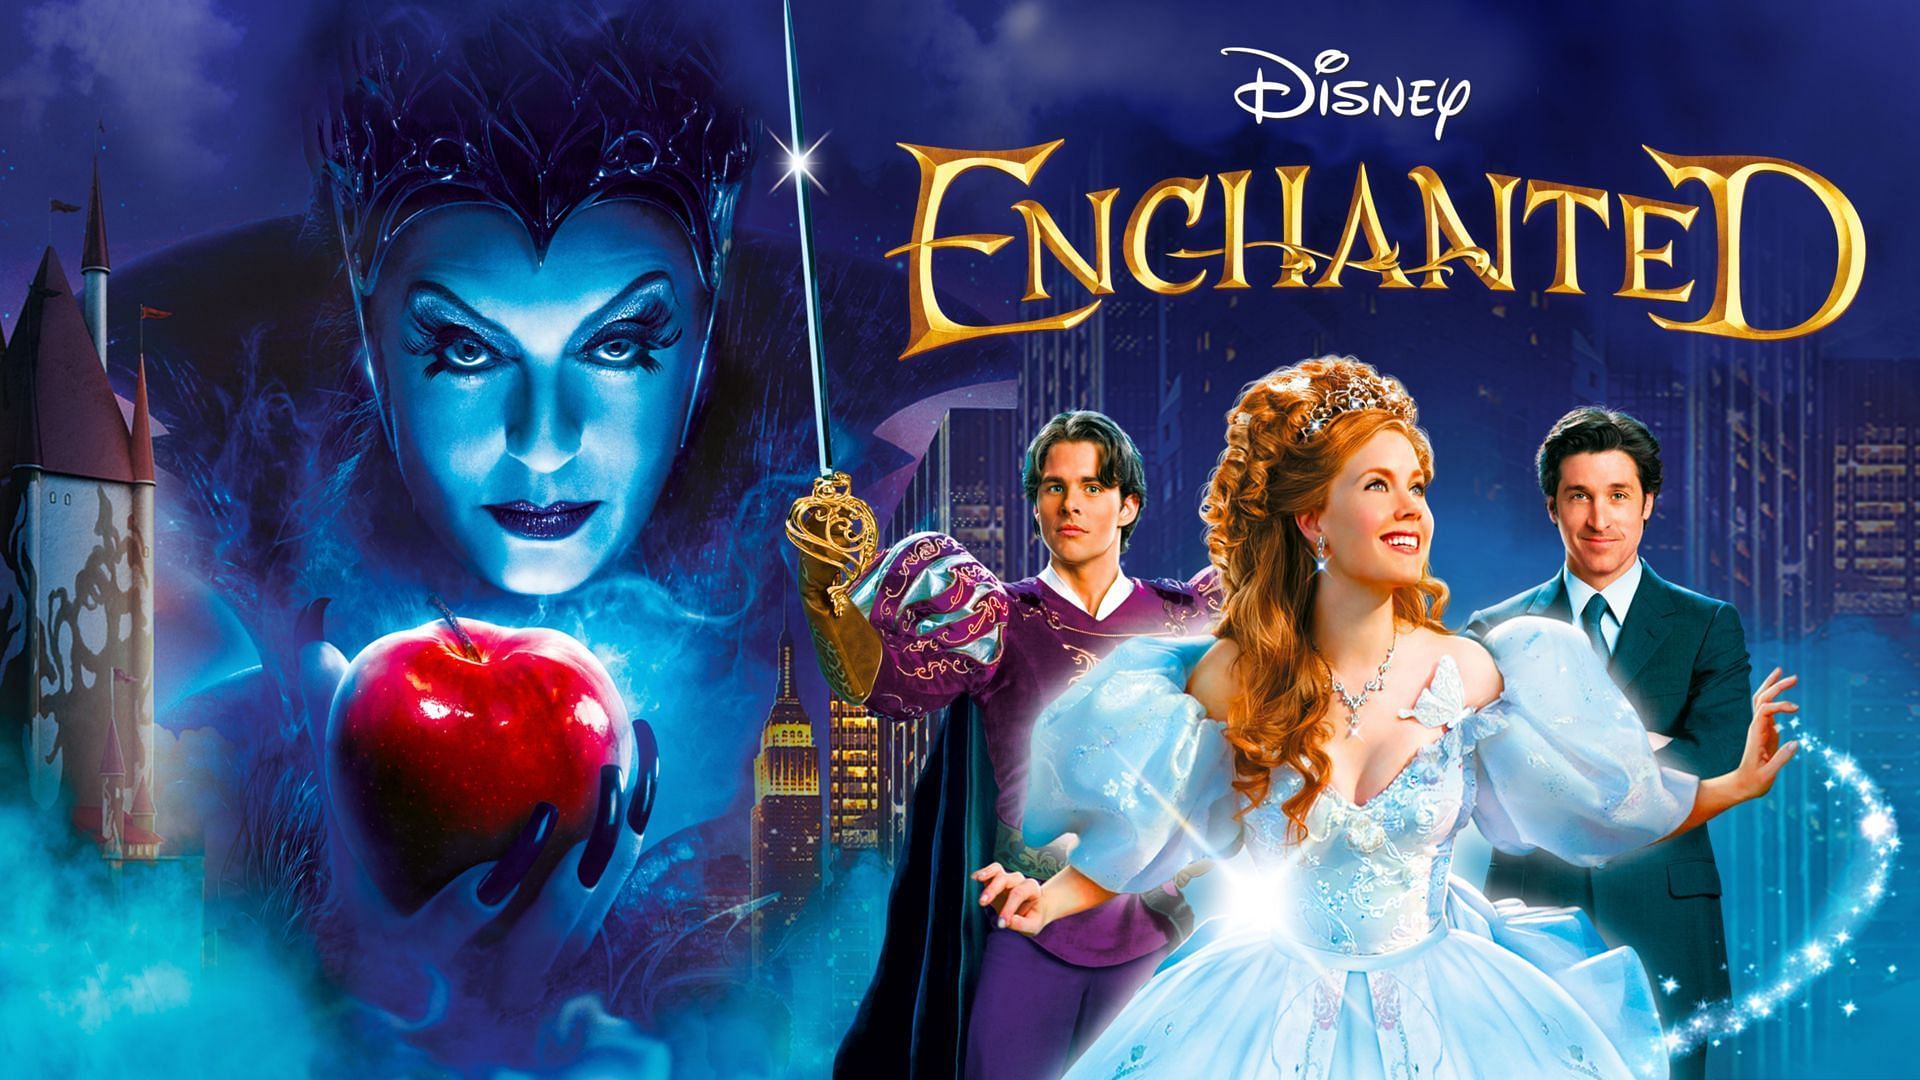 5 fun facts to know about Enchanted (Image via Disney)